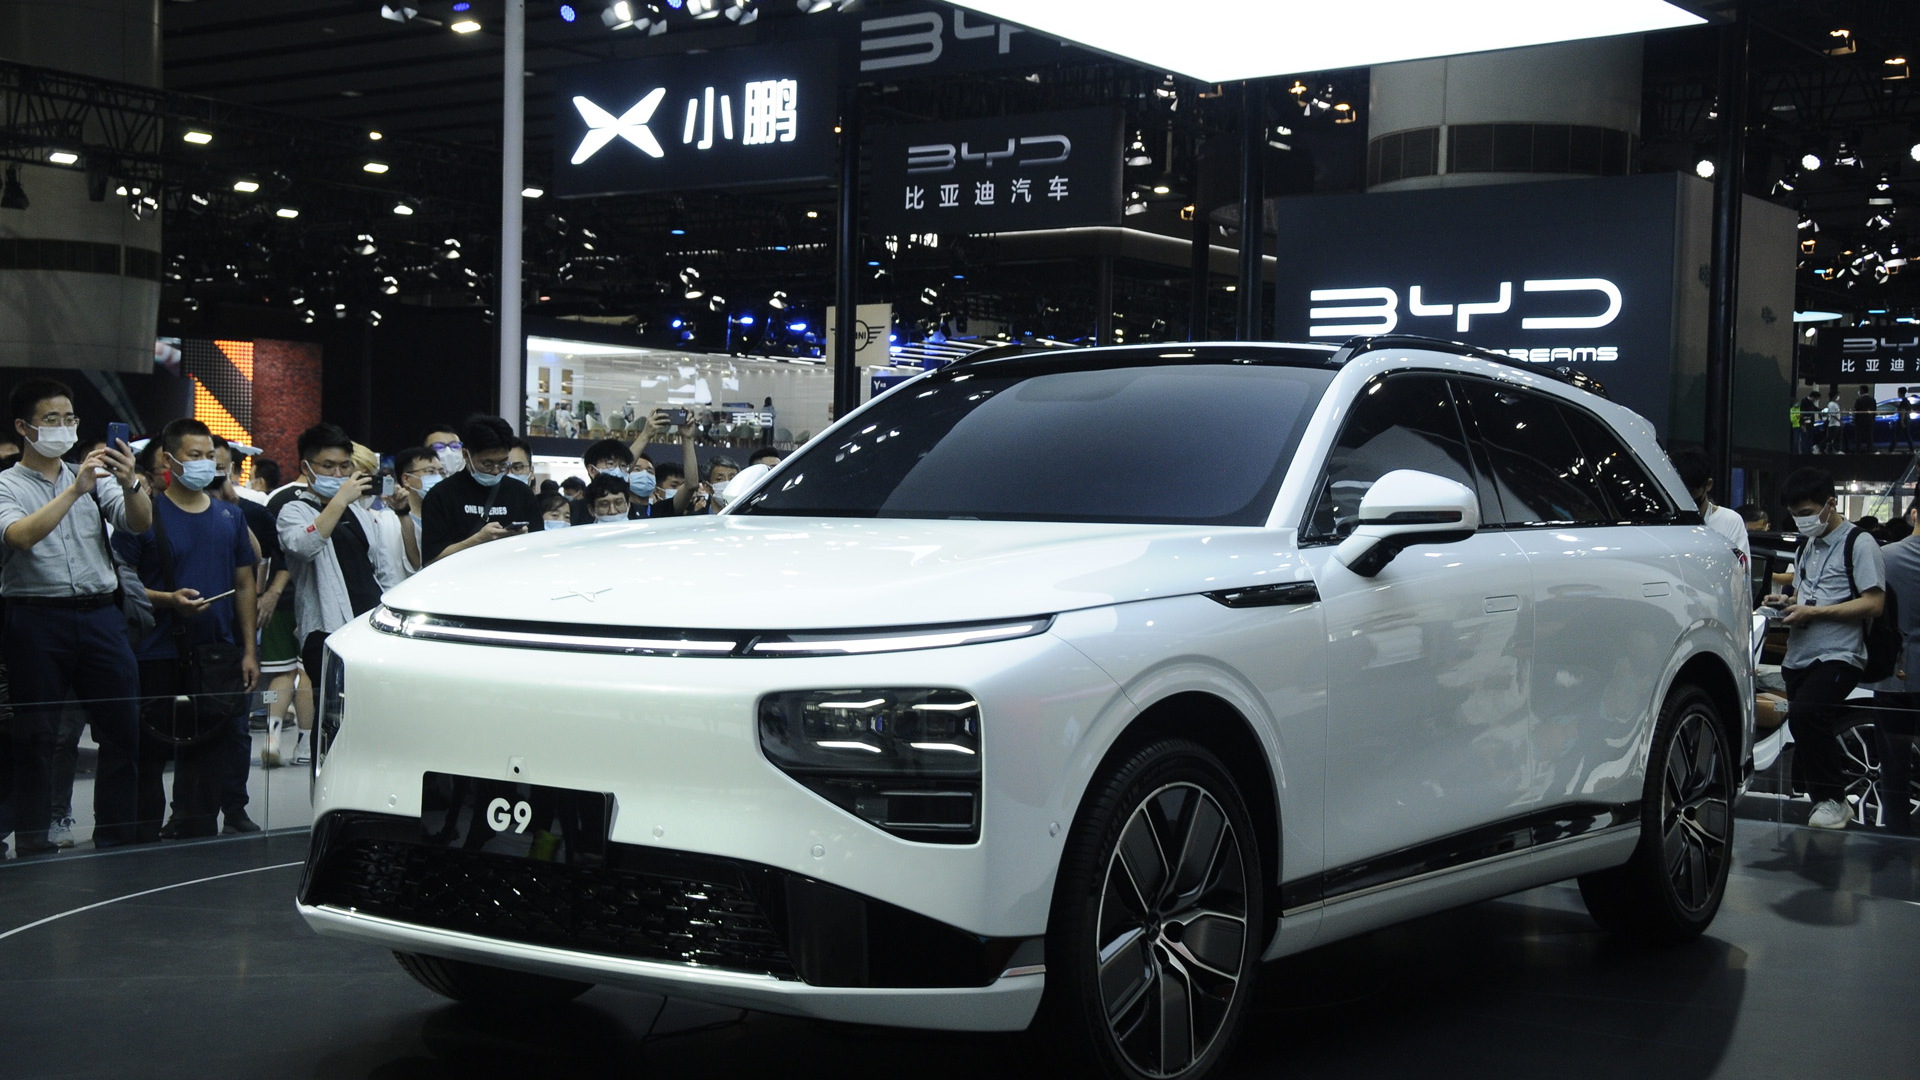 Xpeng G9 flagship crossover debuts at Auto Guangzhou 2021